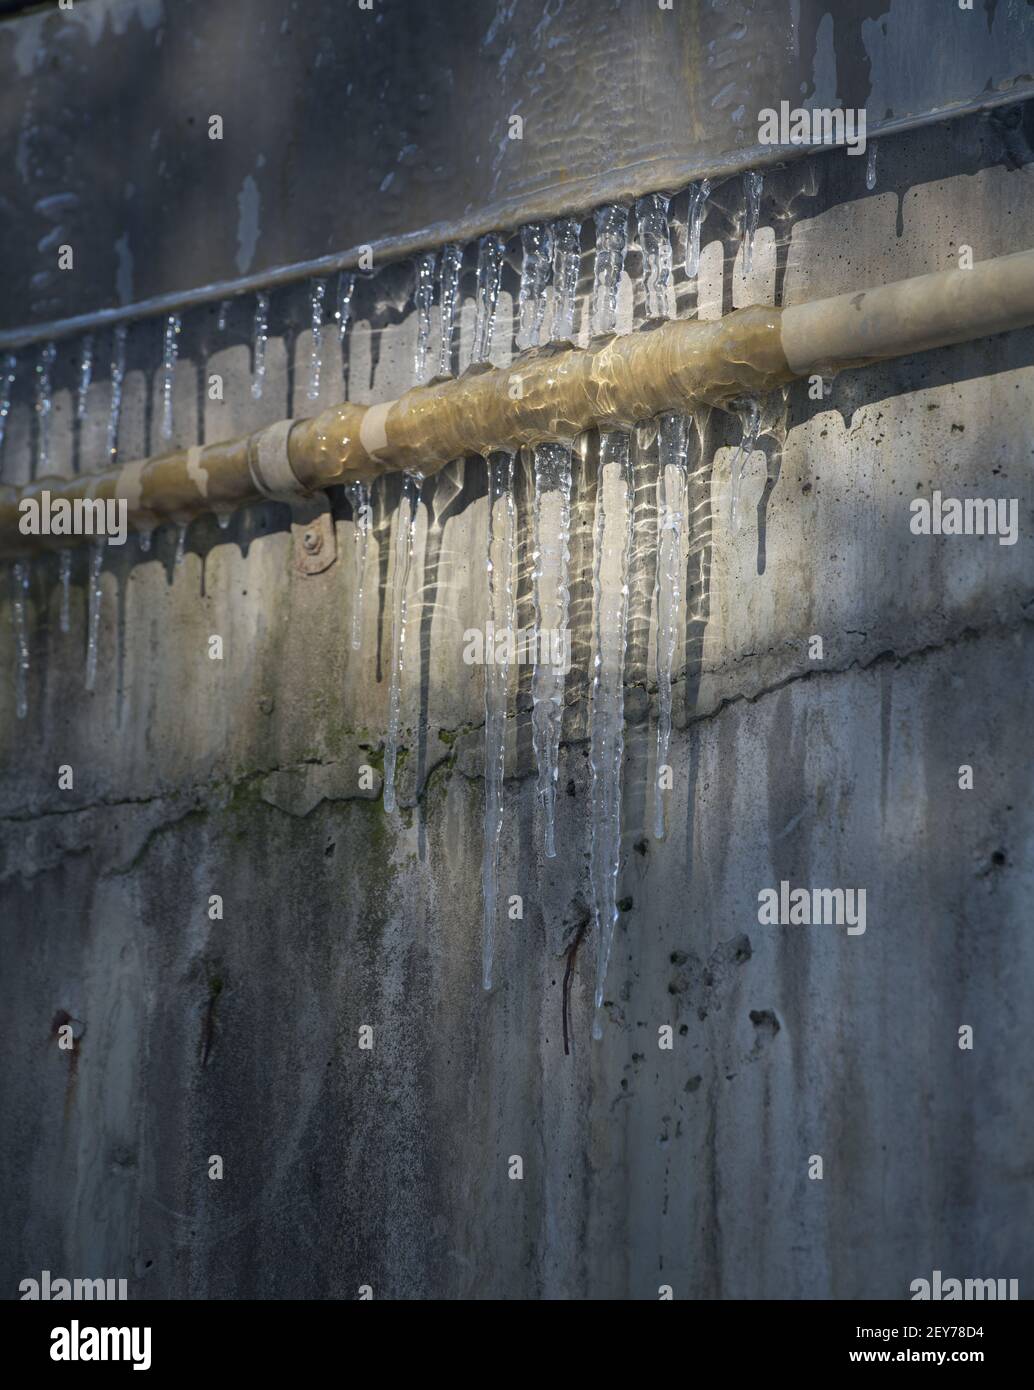 frozen pointy icicles hanging from industrial metal pipe on grungy water damaged concrete building ice shadows on exterior concrete wall in background Stock Photo